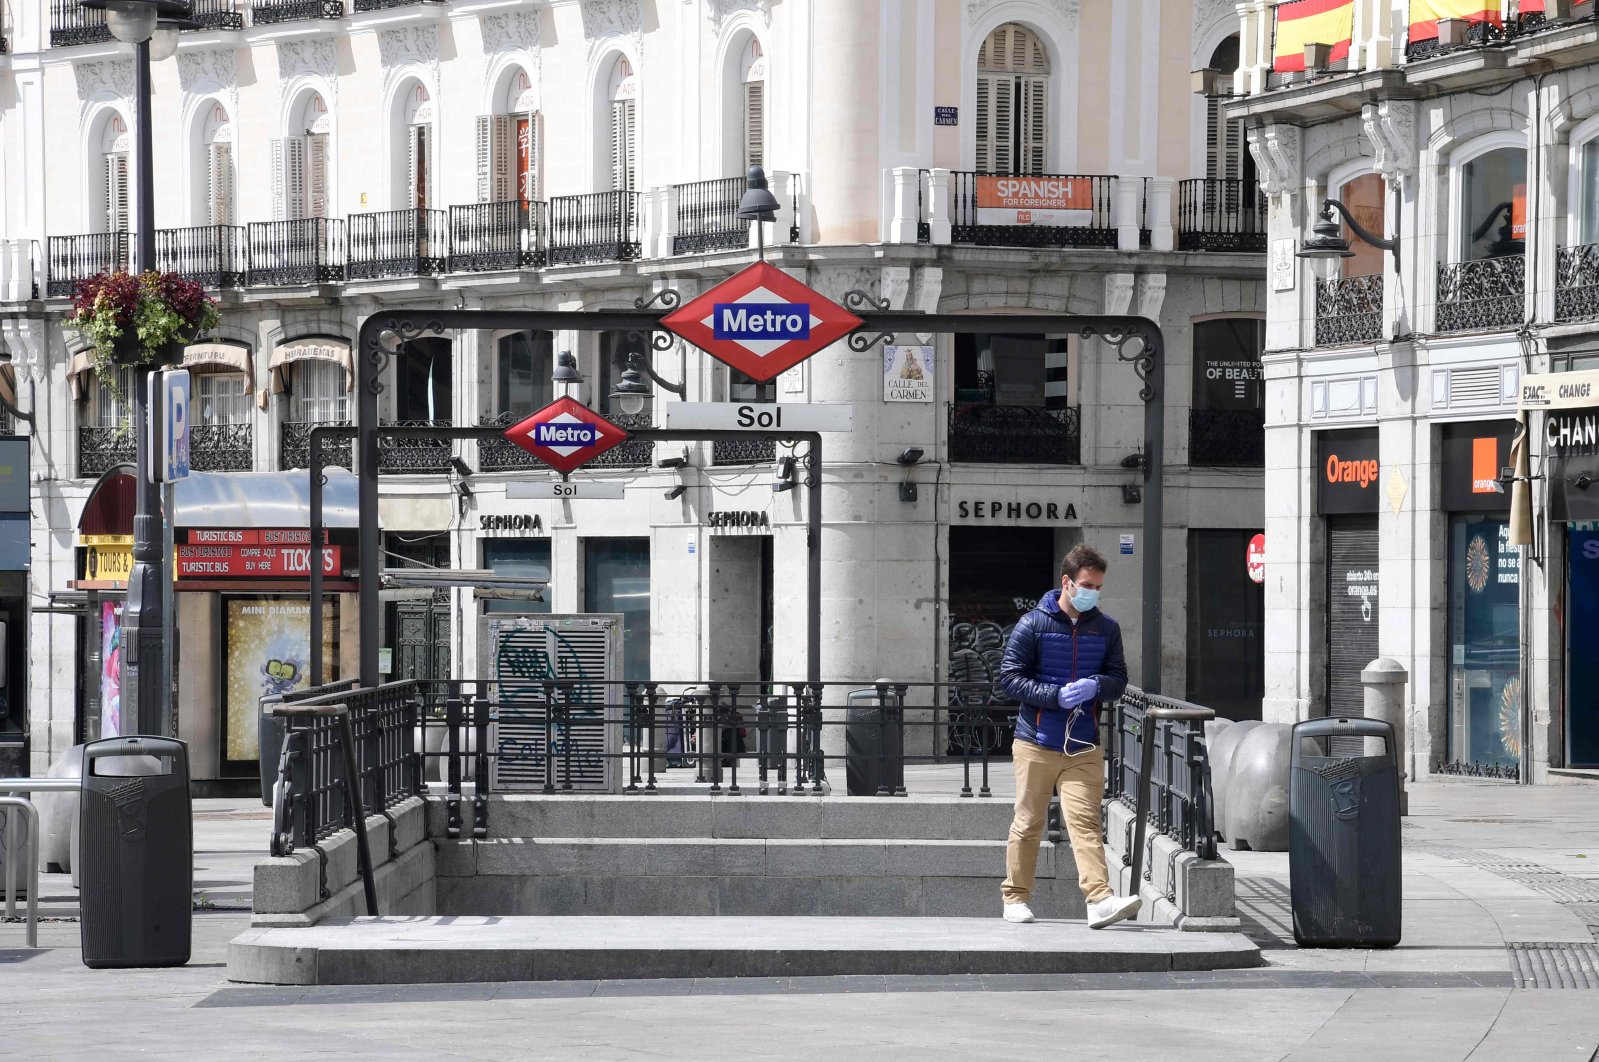 A man wearing a face mask exits the Sol metro station at Puerta del Sol square in Madrid during a national lockdown to prevent the spread of the new coronavirus, Thursday, April 1, 2020. (AFP Photo)